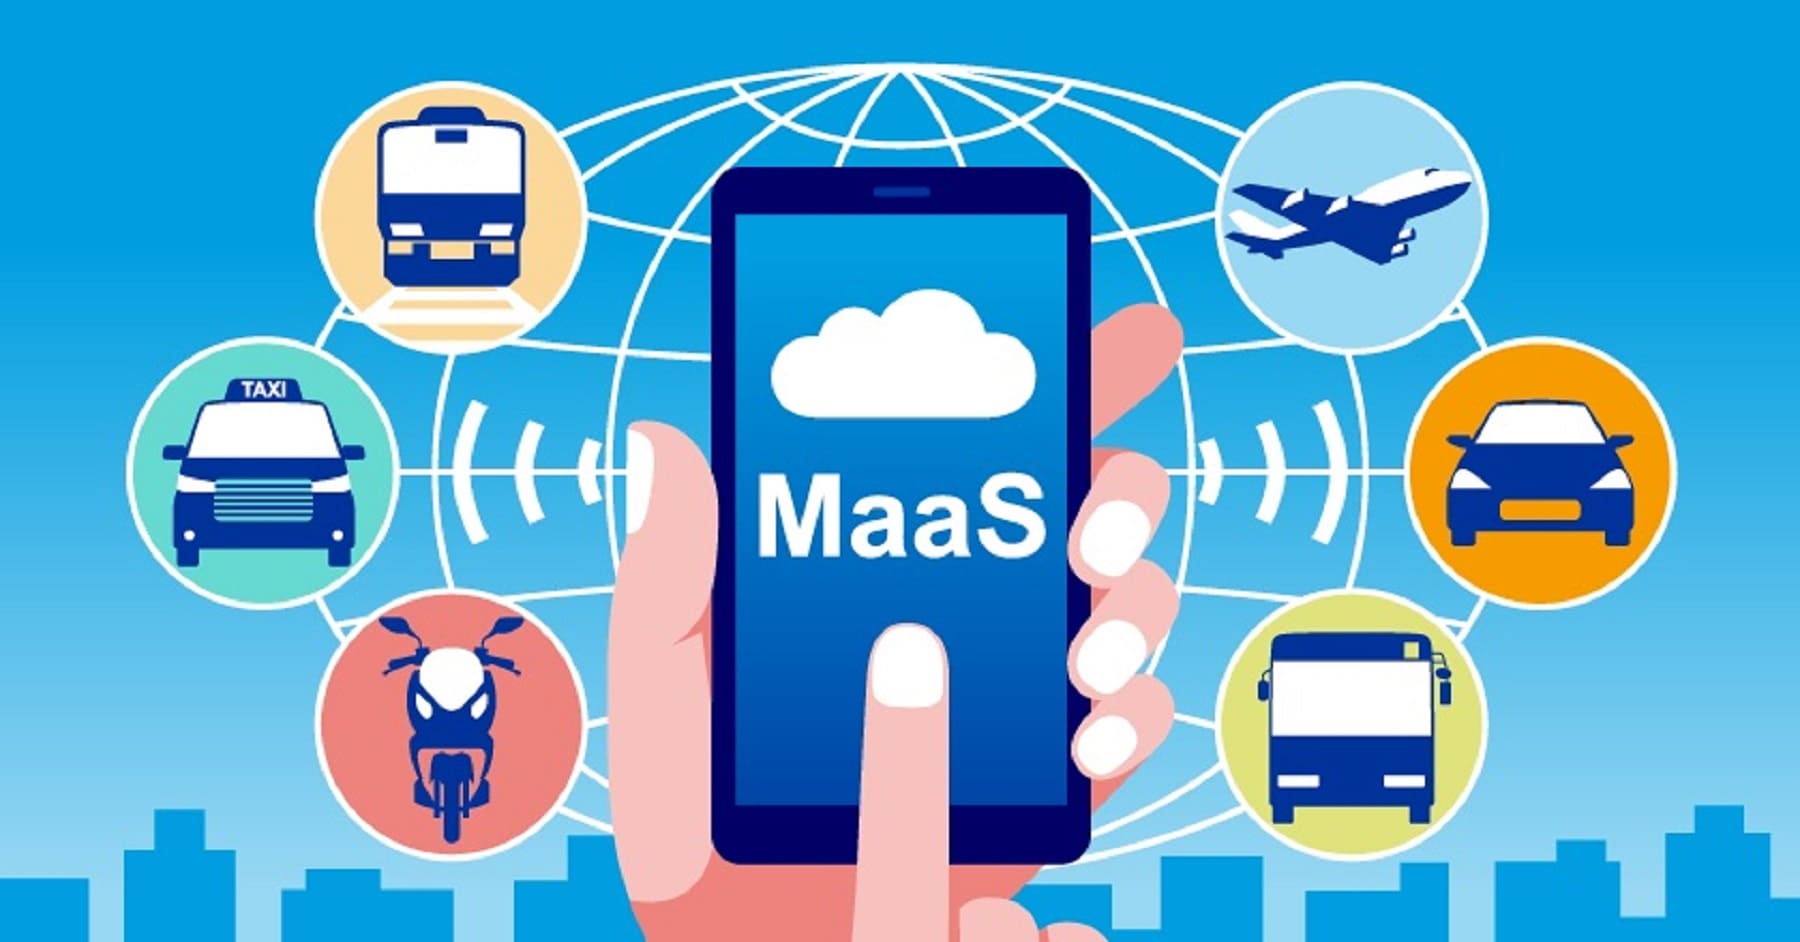 MaaS (Mobility As A Service): Why Is It A Good Choice?